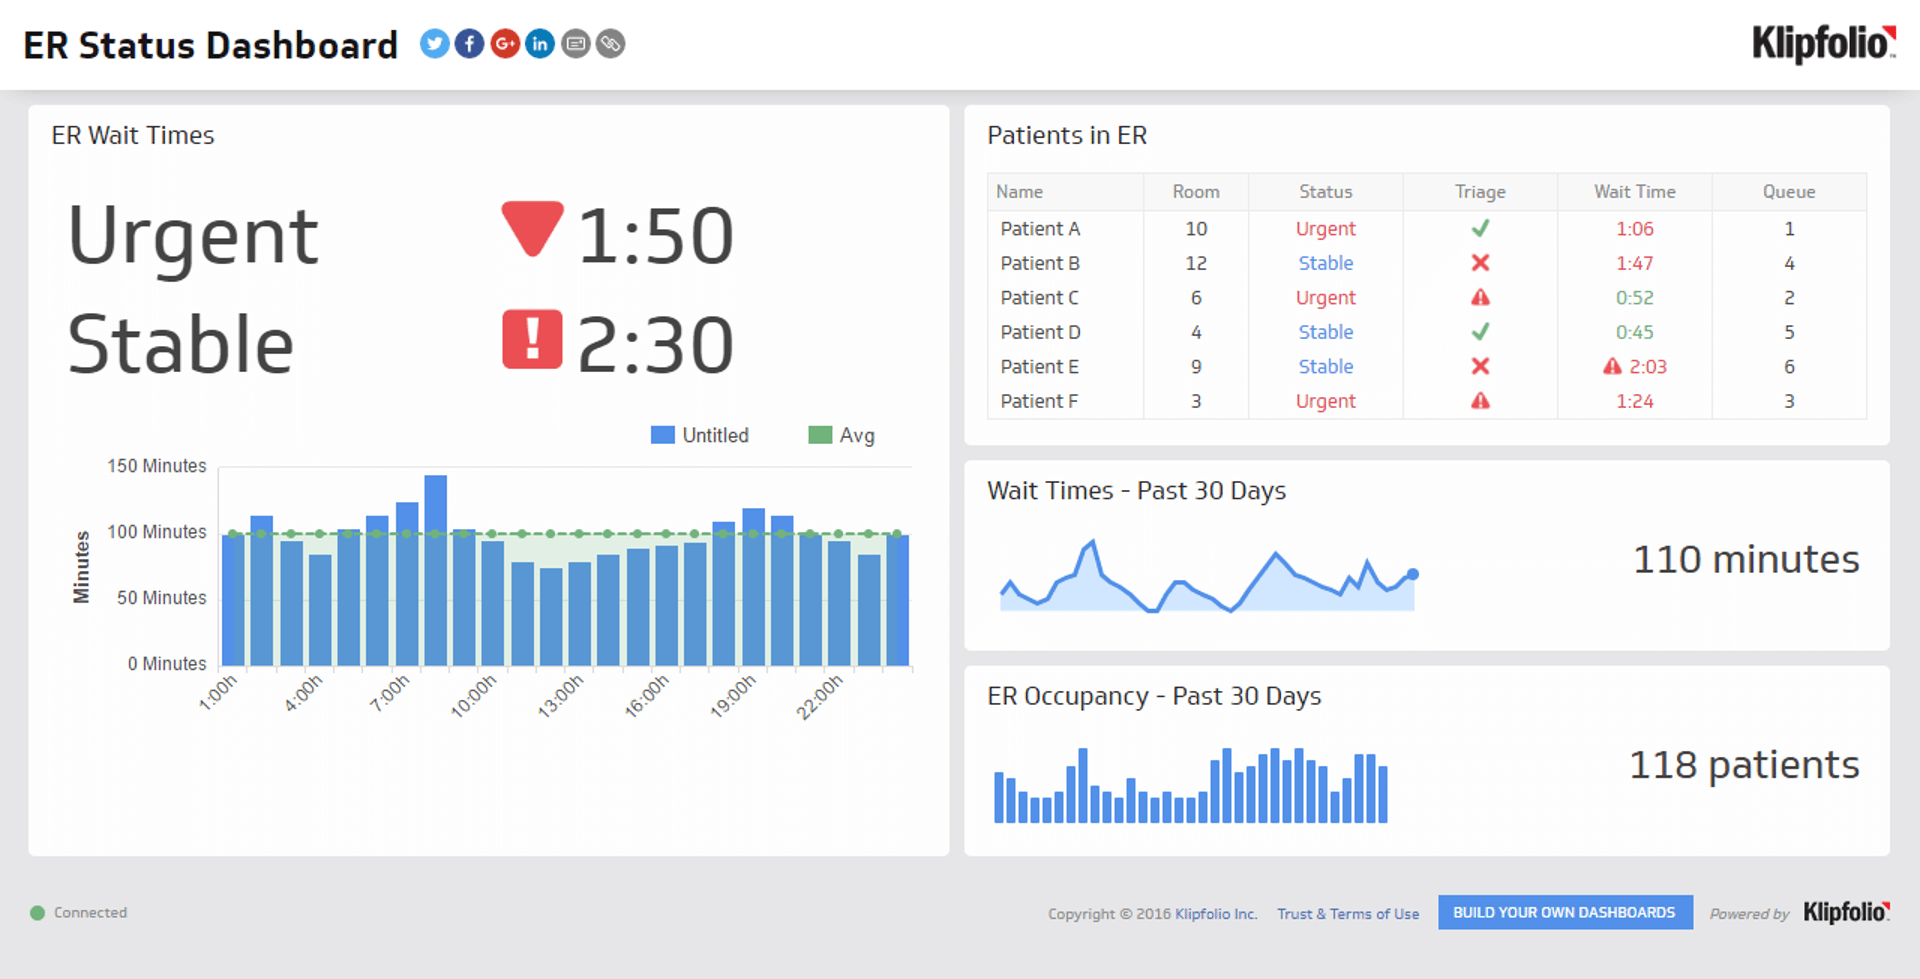 Related Dashboard Examples - ER Status Dashboard